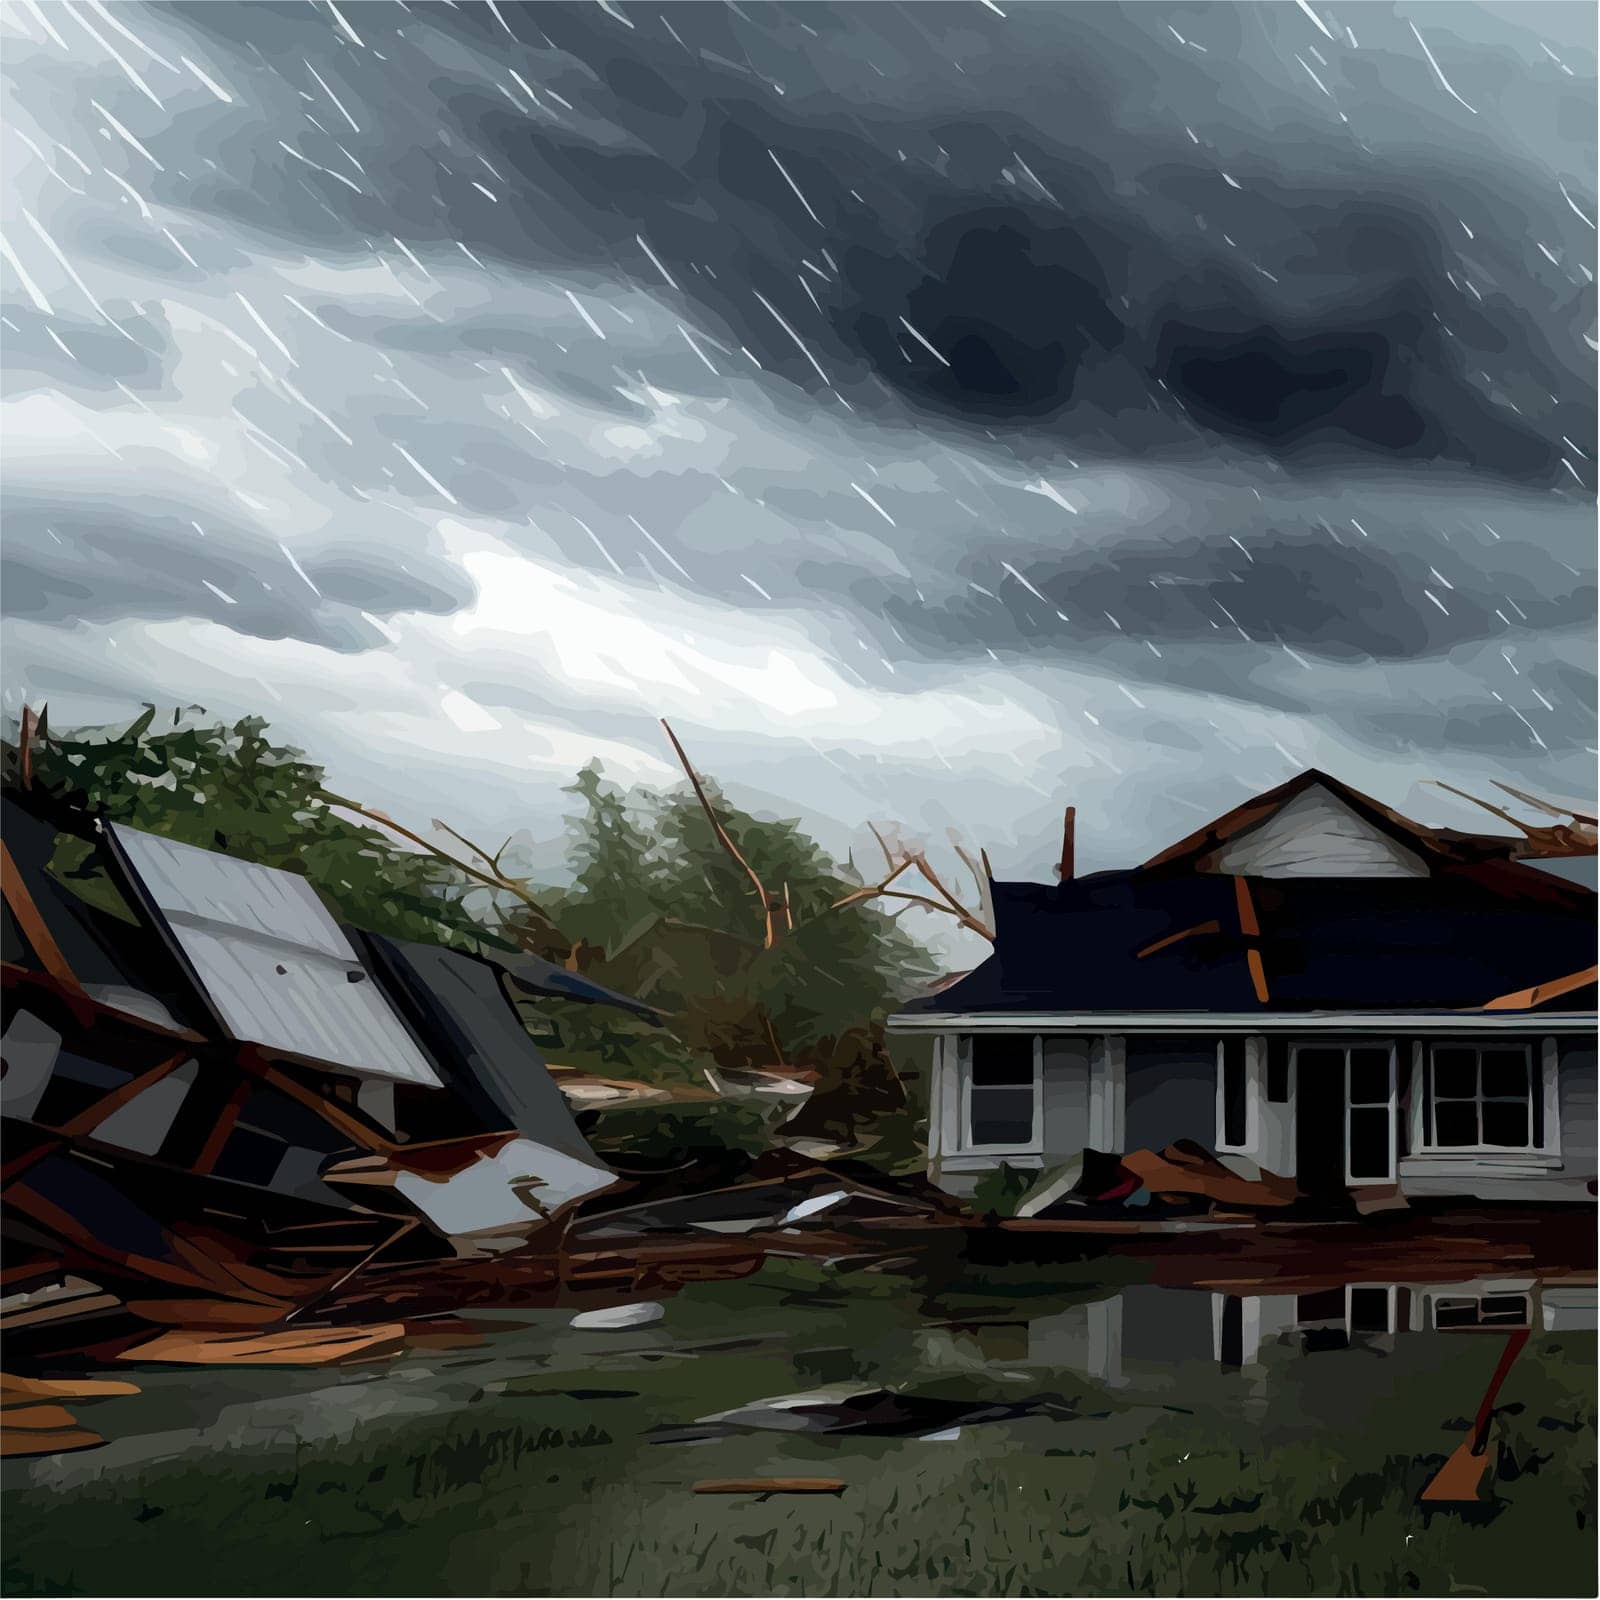 Destructive tornado destroys house, trees break. Bad weather landscape and sign of distress and warning. Storm wind and downpour with thunderstorm and dark clouds. Vector illustration